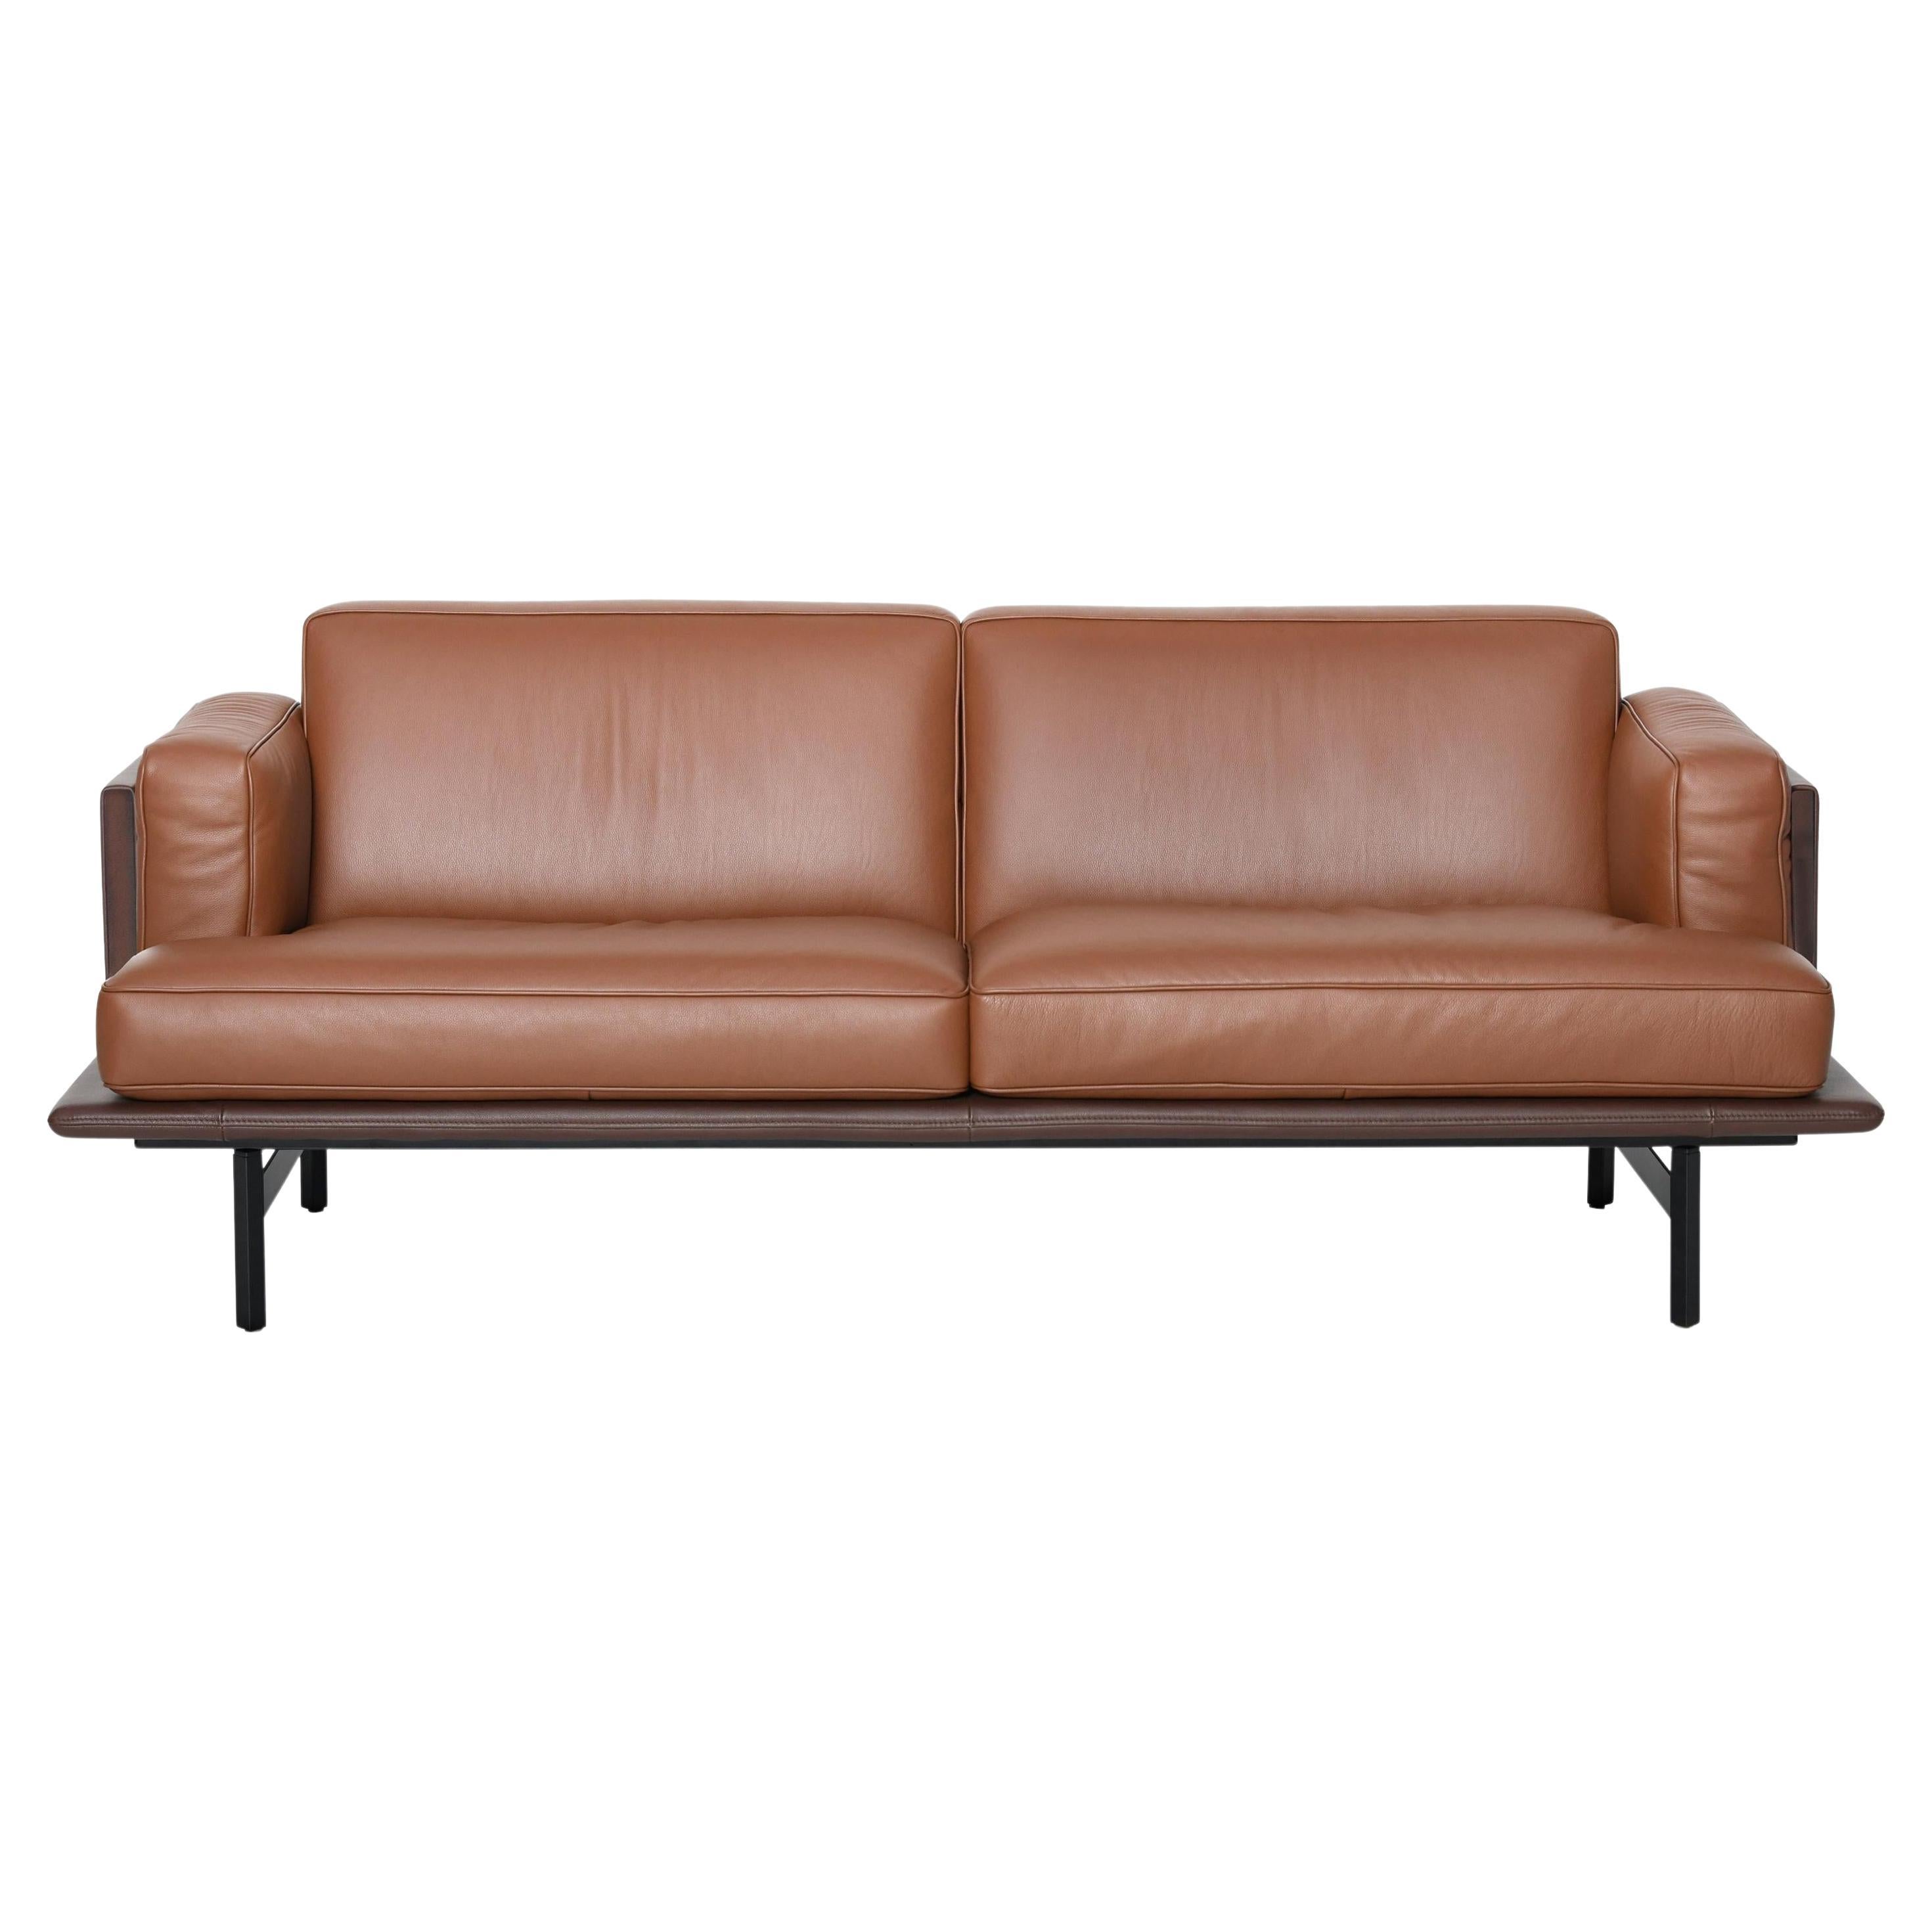 De Sede DS-175 Large Two-Seat Sofa in Hazel Upholstery by Patrick Norguet For Sale